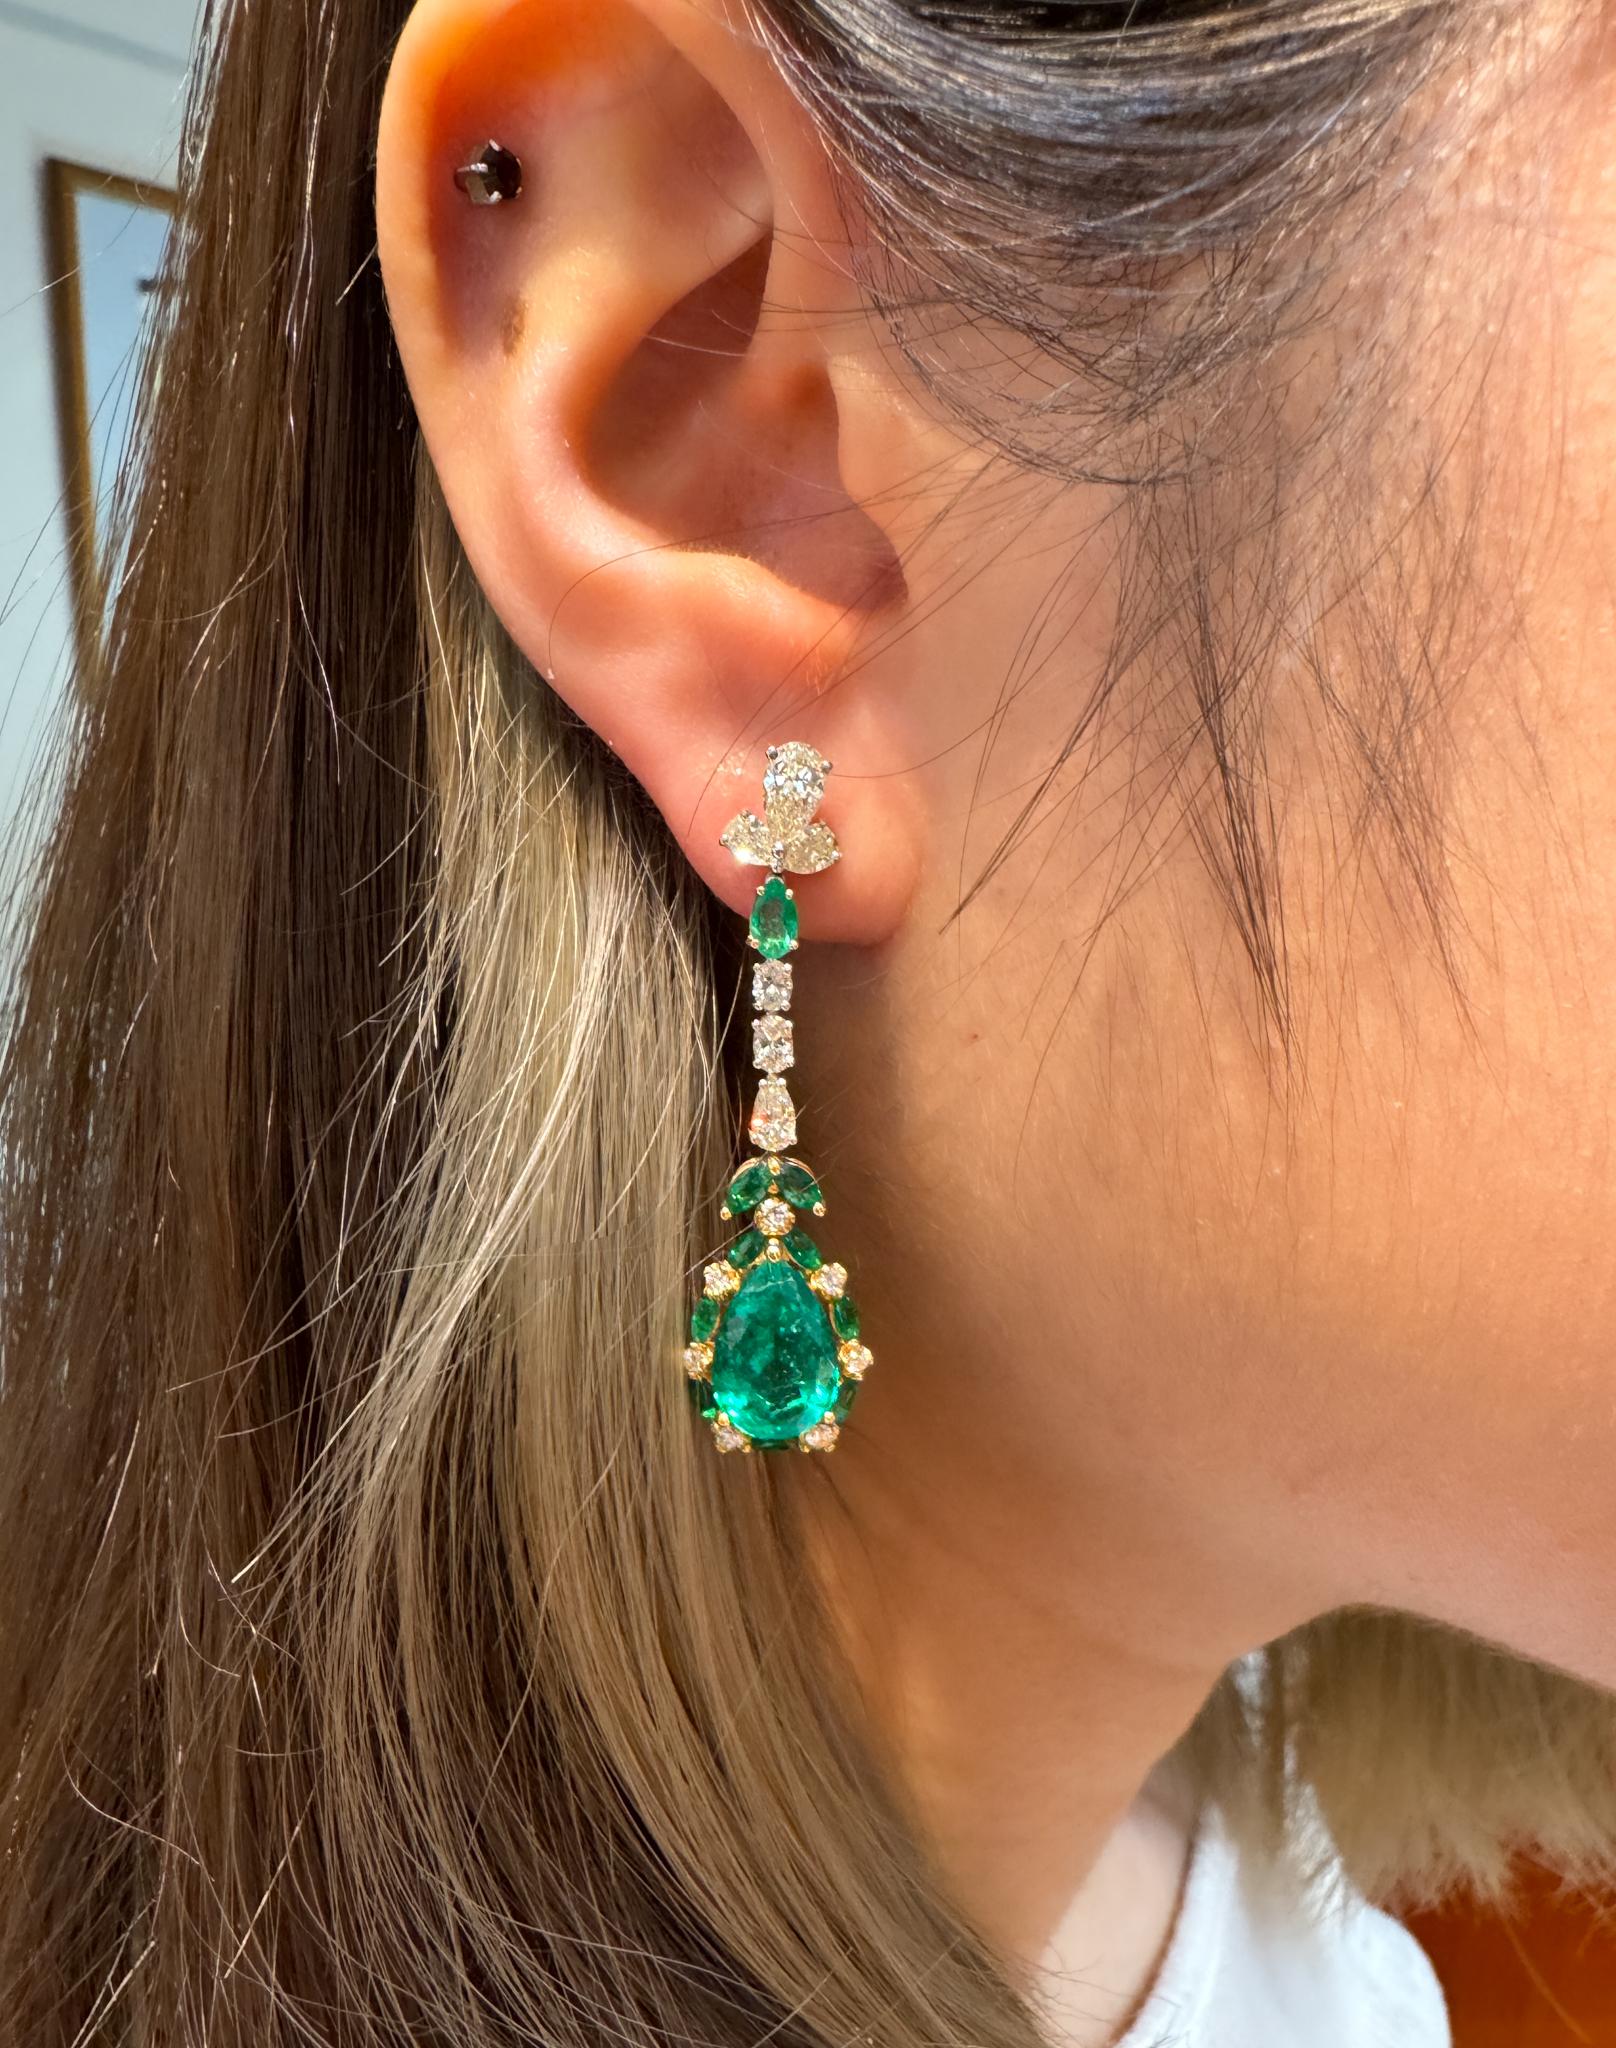 10 Carat Pear Cut Mirrored Emerald and Diamond Drop Earrings in 18k Gold For Sale 1